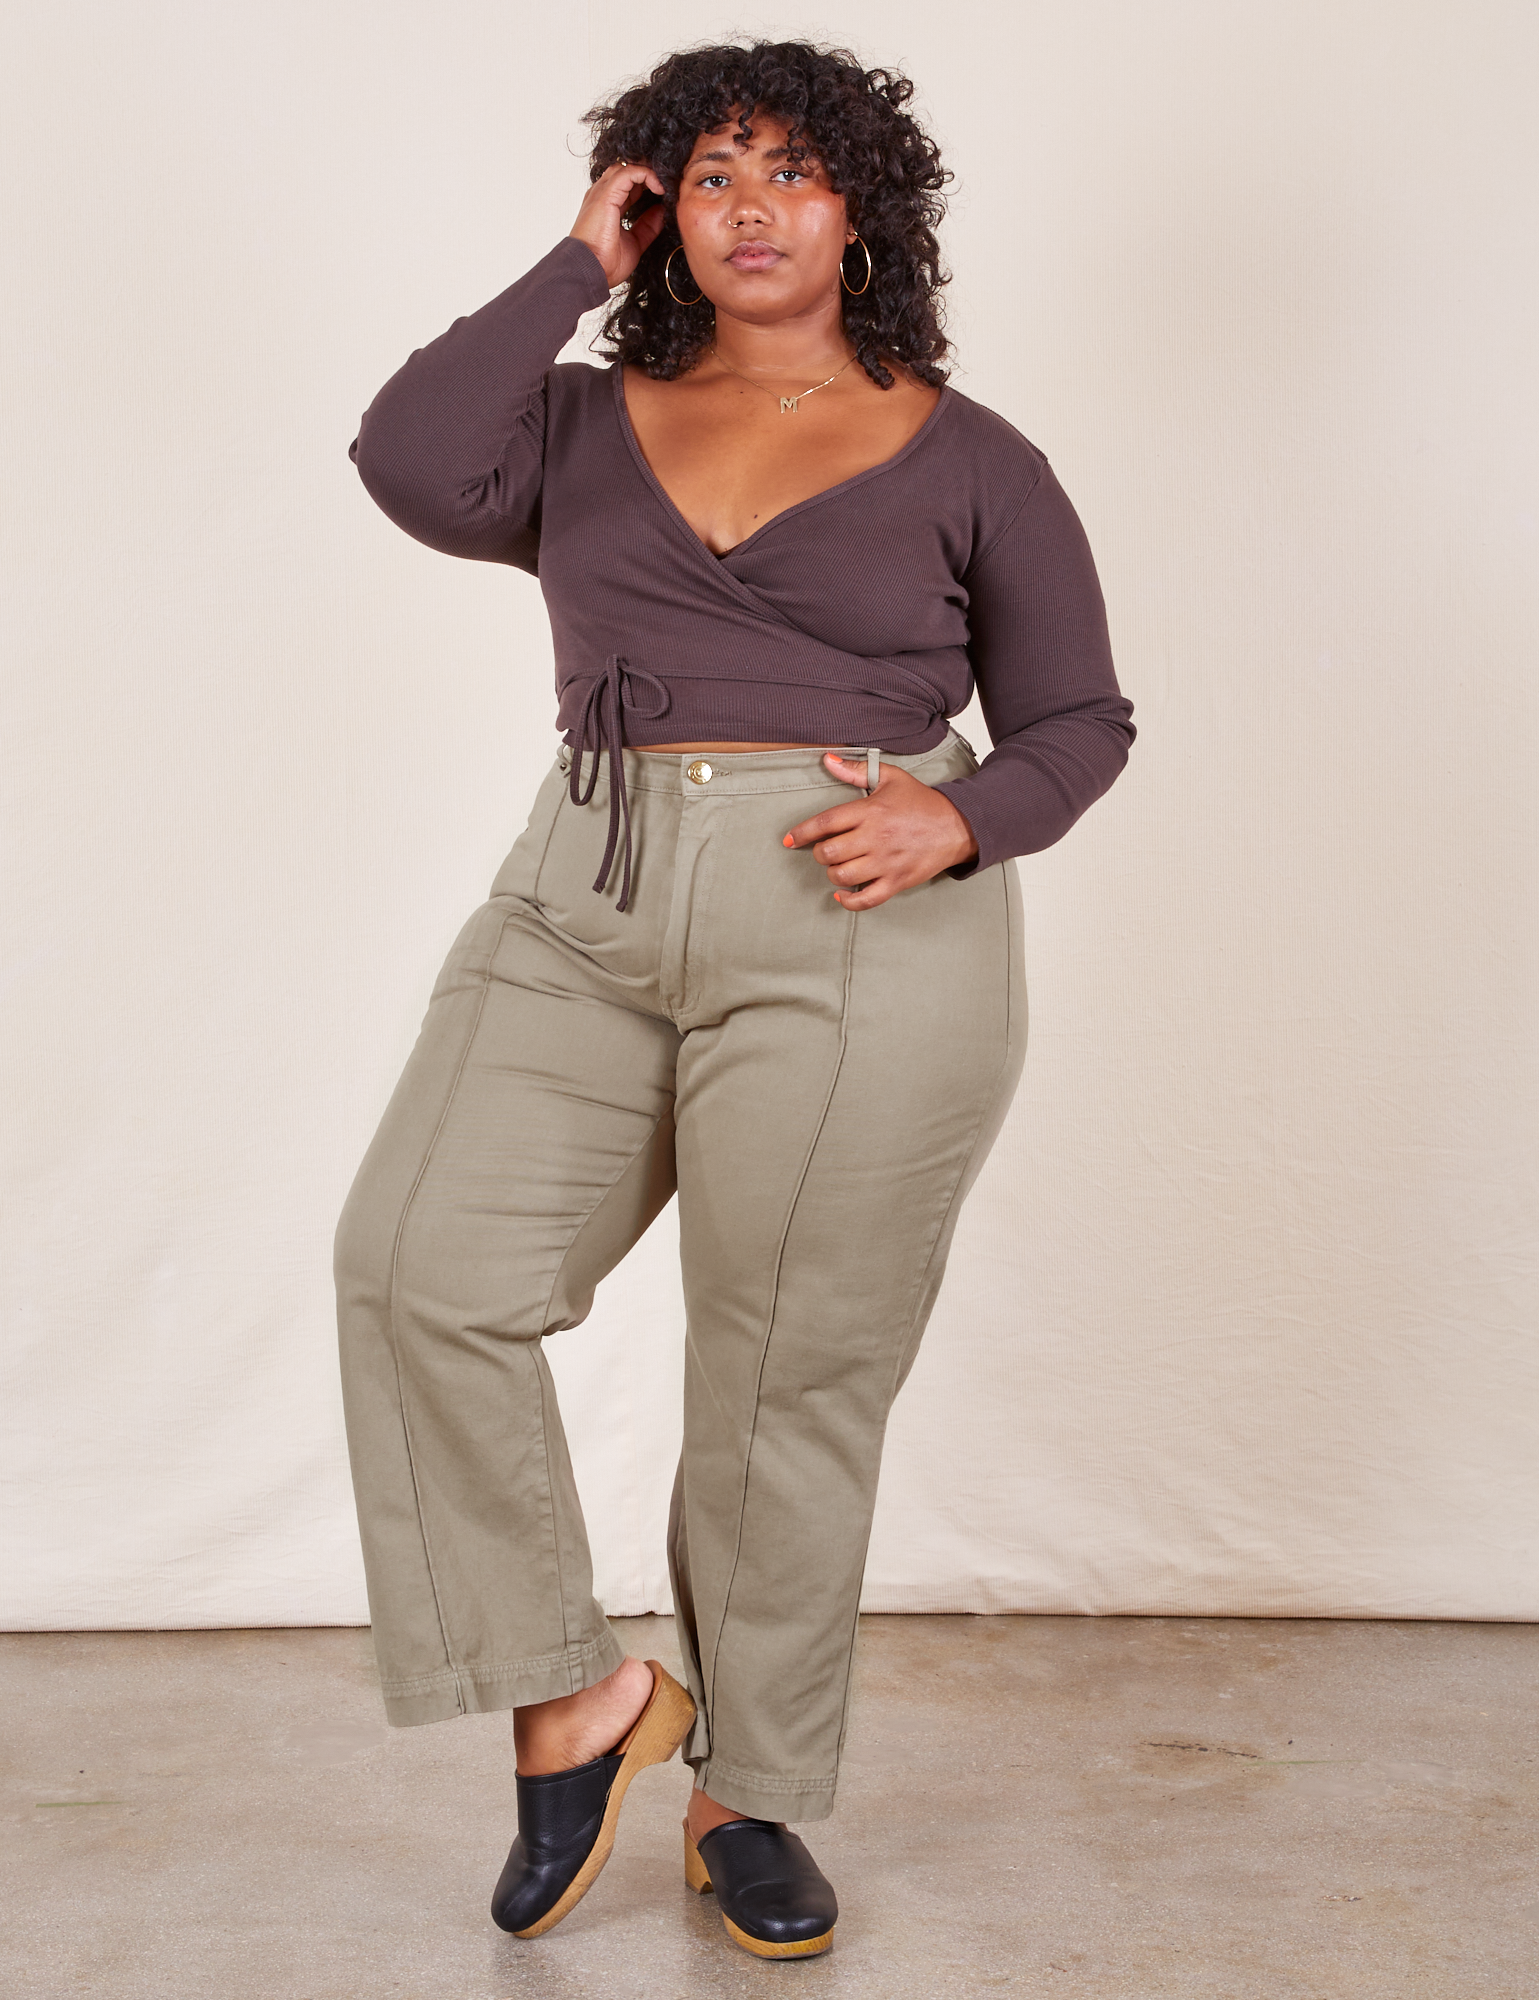 Morgan is 5&#39;5&quot; and wearing 1XL Western Pants in Khaki Grey paired with espresso brown Wrap Top